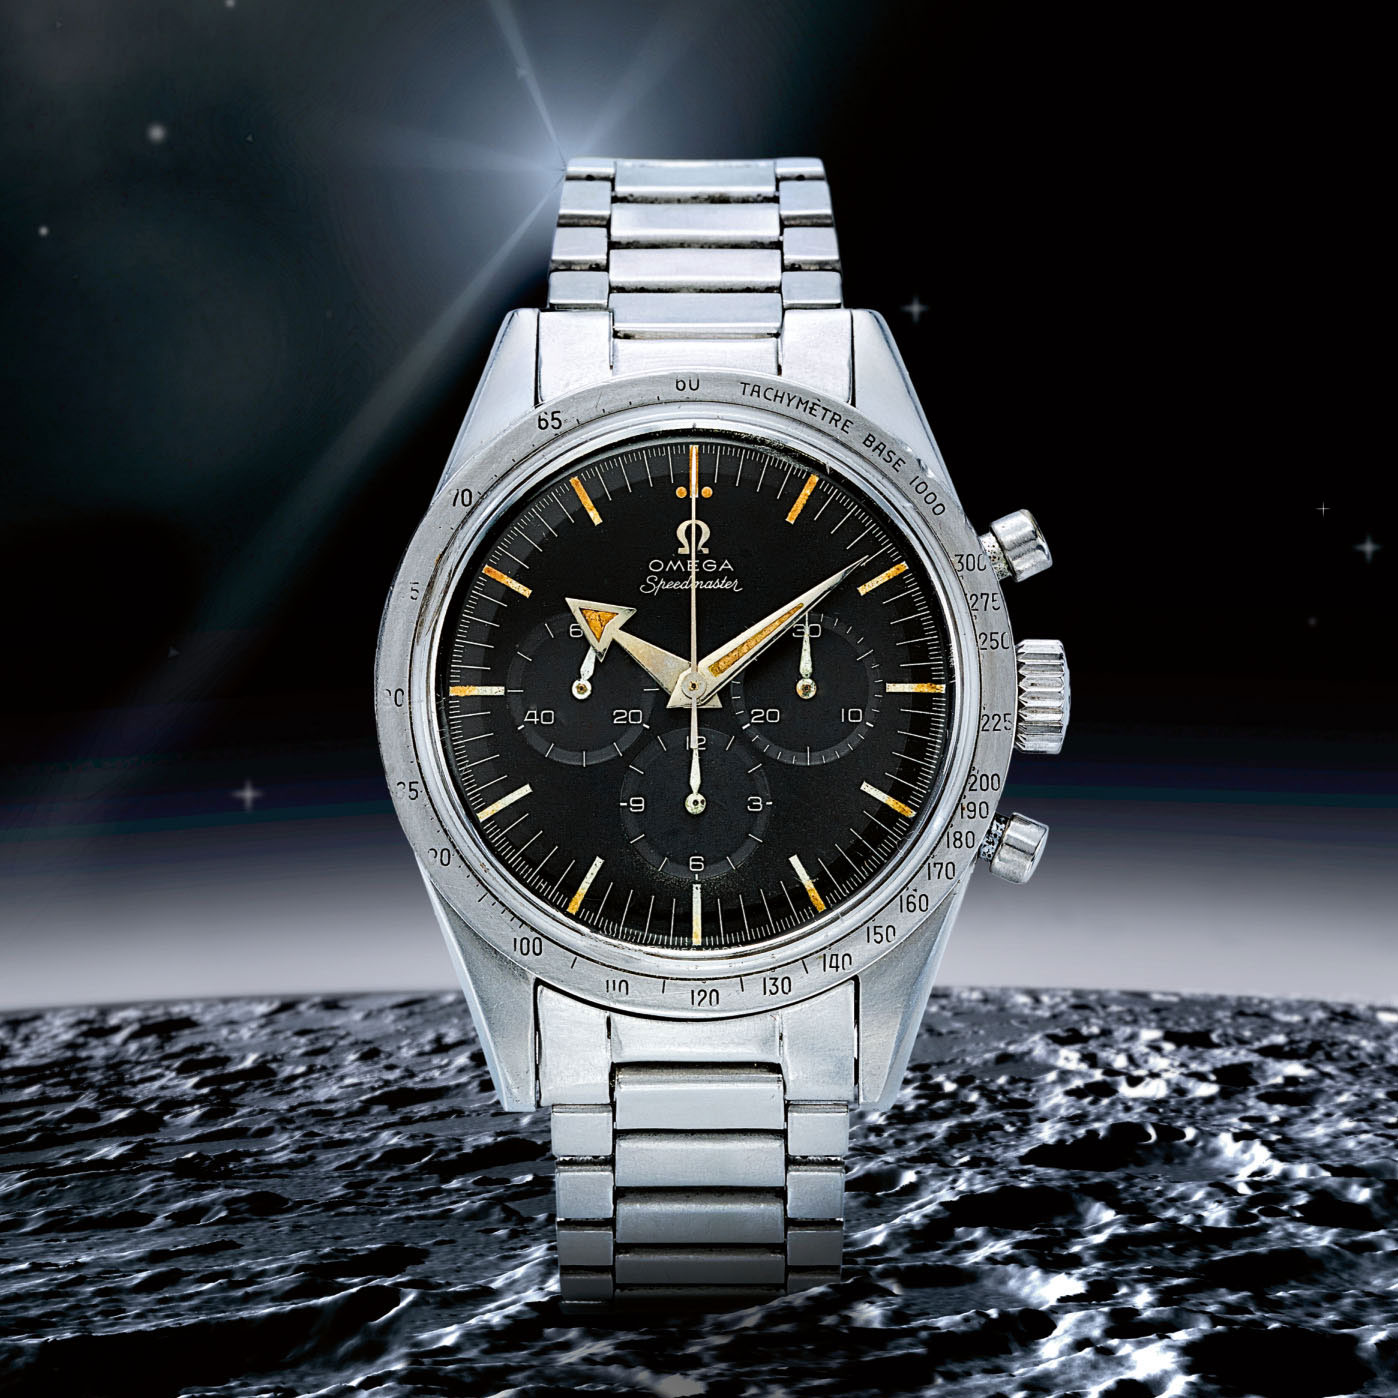 The Omega Calibre 321 as seen in a 1958 Speedmaster Ref CK2915-1 'Broad Arrow' from the Sotheby’s Omega Speedmaster: To the Moon and Back, Celebrating 50 years since Apollo 11 sale (July 2019, image: sothebys.com)